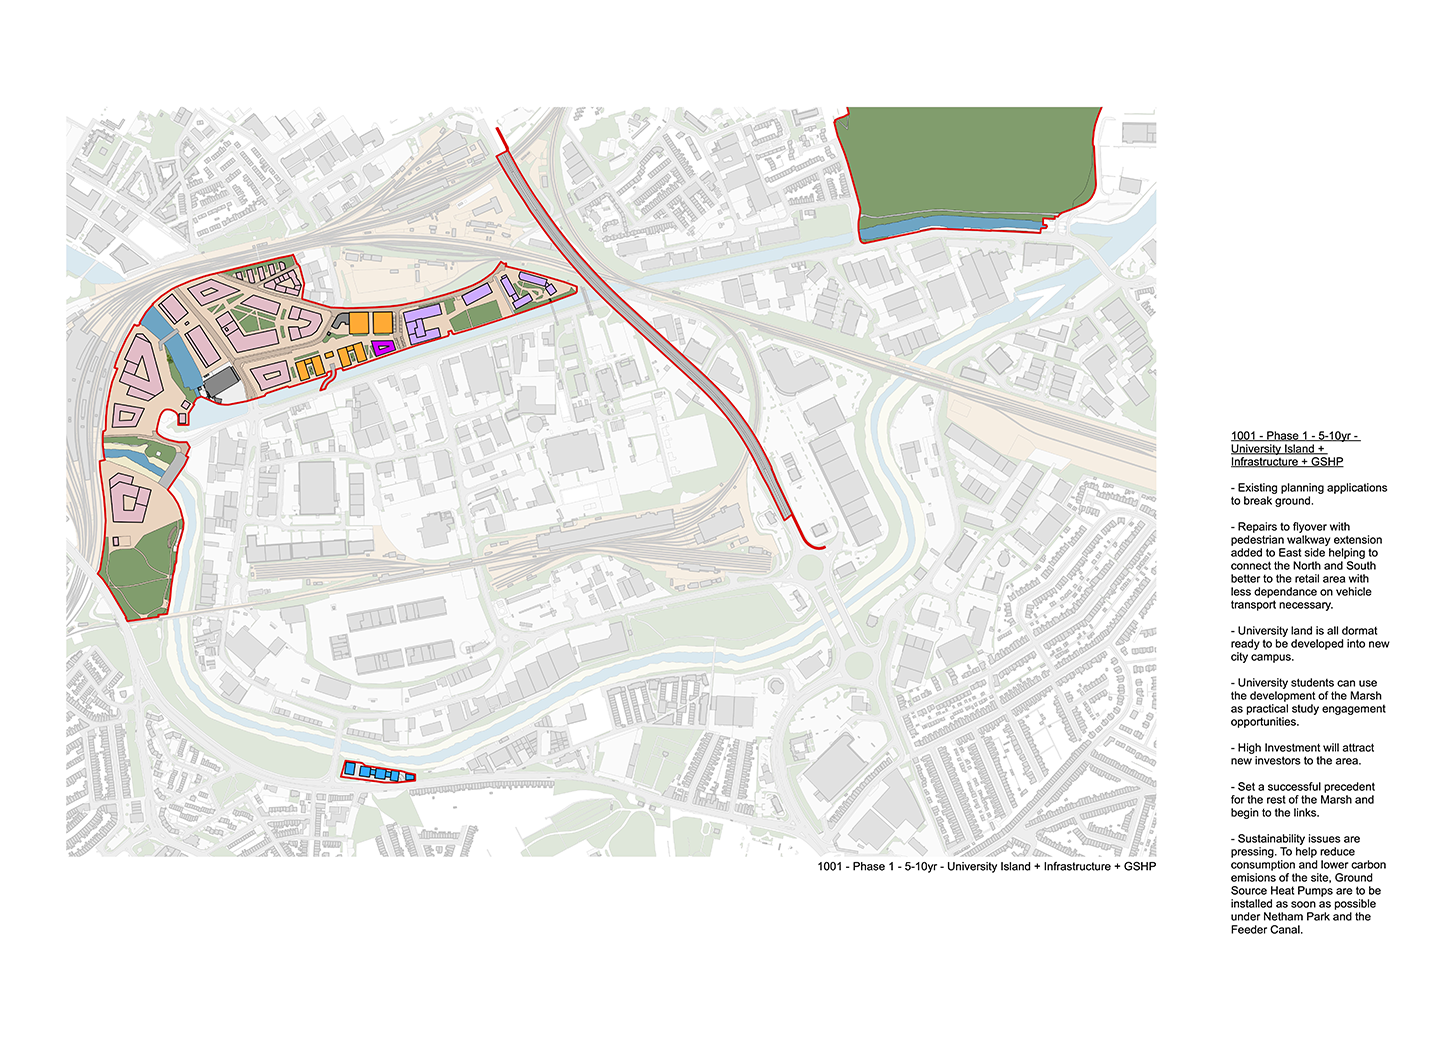 1001-Phase 1 - 5-10yr - University Island - Infrastructure + GSHP.png